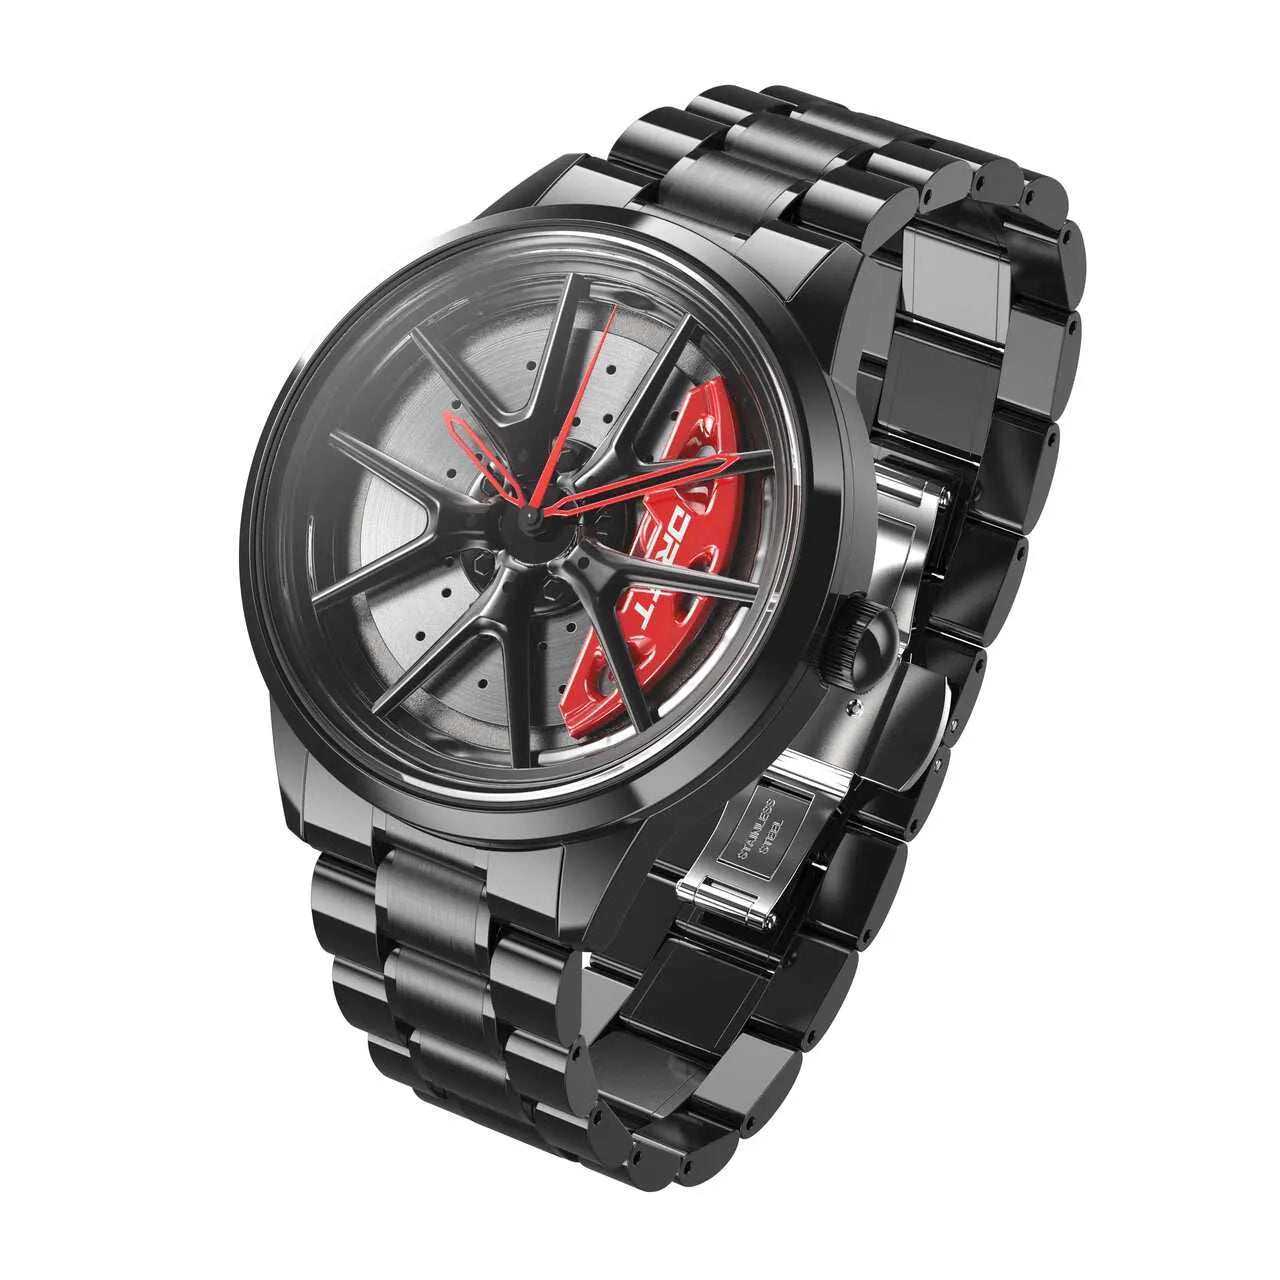 Illuminate your style with our fiery red Nitro Rim Watch! Crafted by a German startup, these precision watches are designed to captivate motorsport, tuning, and auto enthusiasts. Get ready to ignite your passion! #id_46744364253514